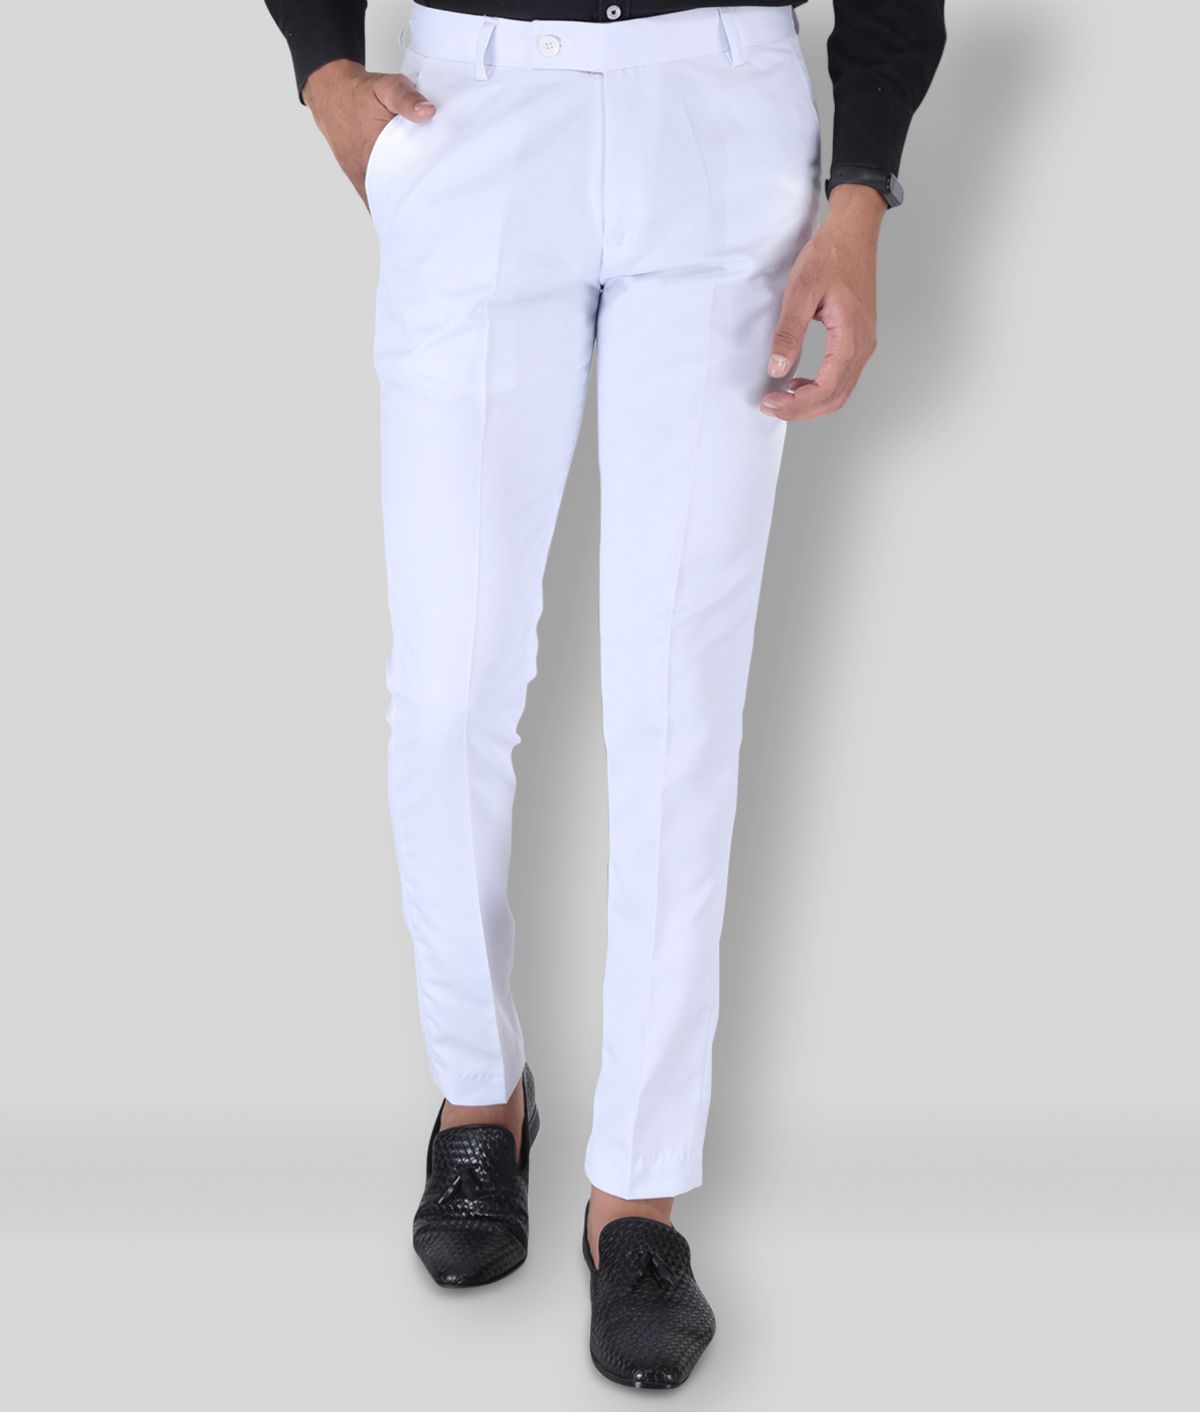     			SREY - White Polycotton Slim - Fit Men's Chinos ( Pack of 1 )